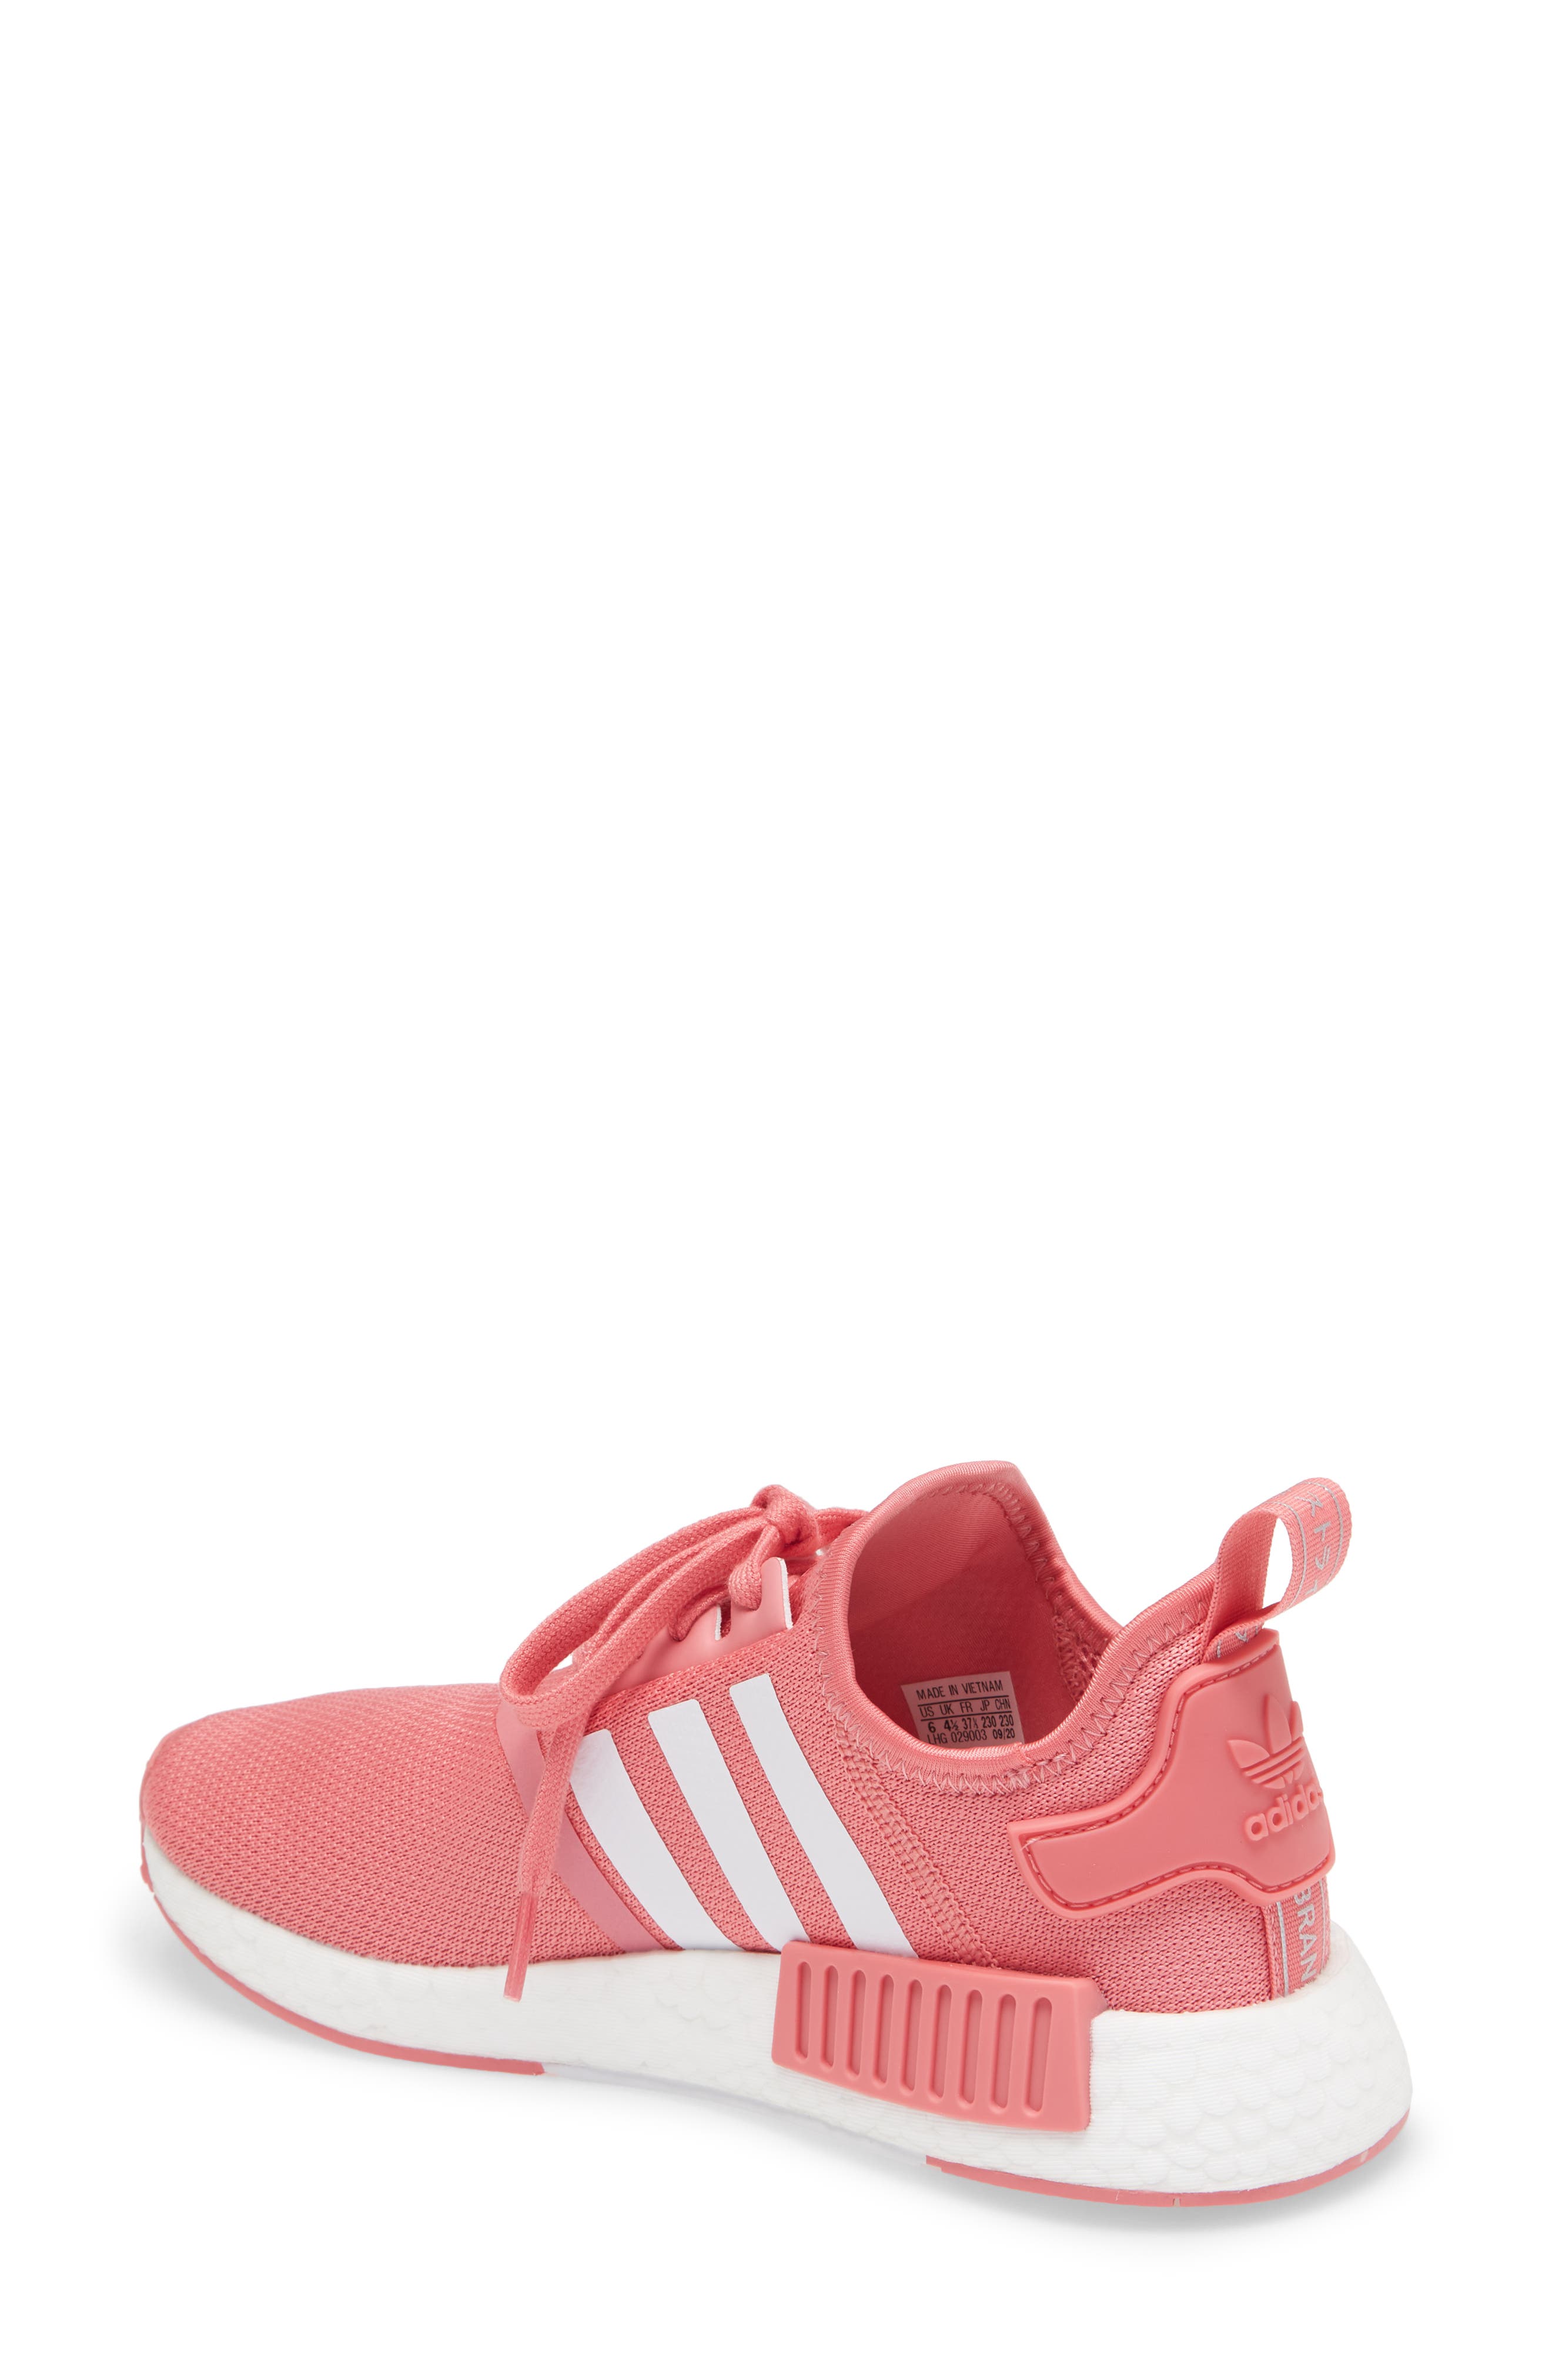 adidas nmd red womens